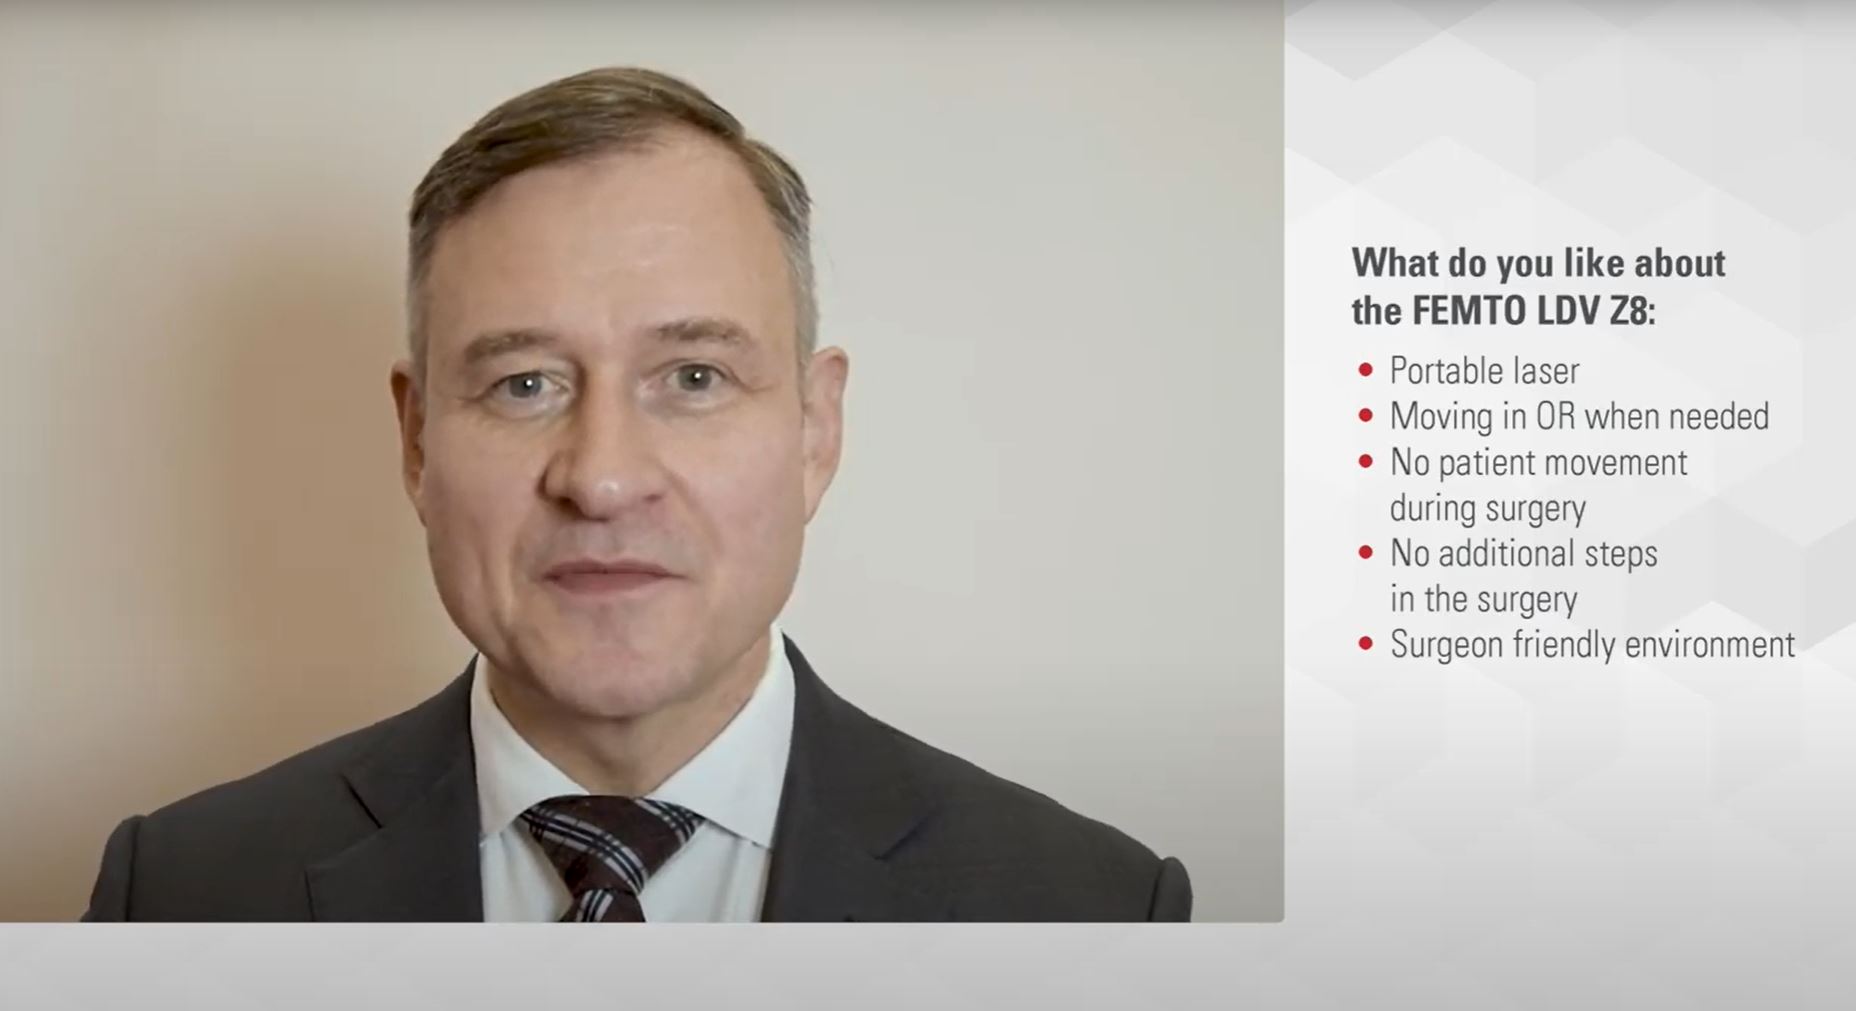 There are several reasons to prefer FEMTO LDV Z8 over other lasers. Prof. Malyugin mentions the main reasons why he chooses our mobile laser for his surgeries. 